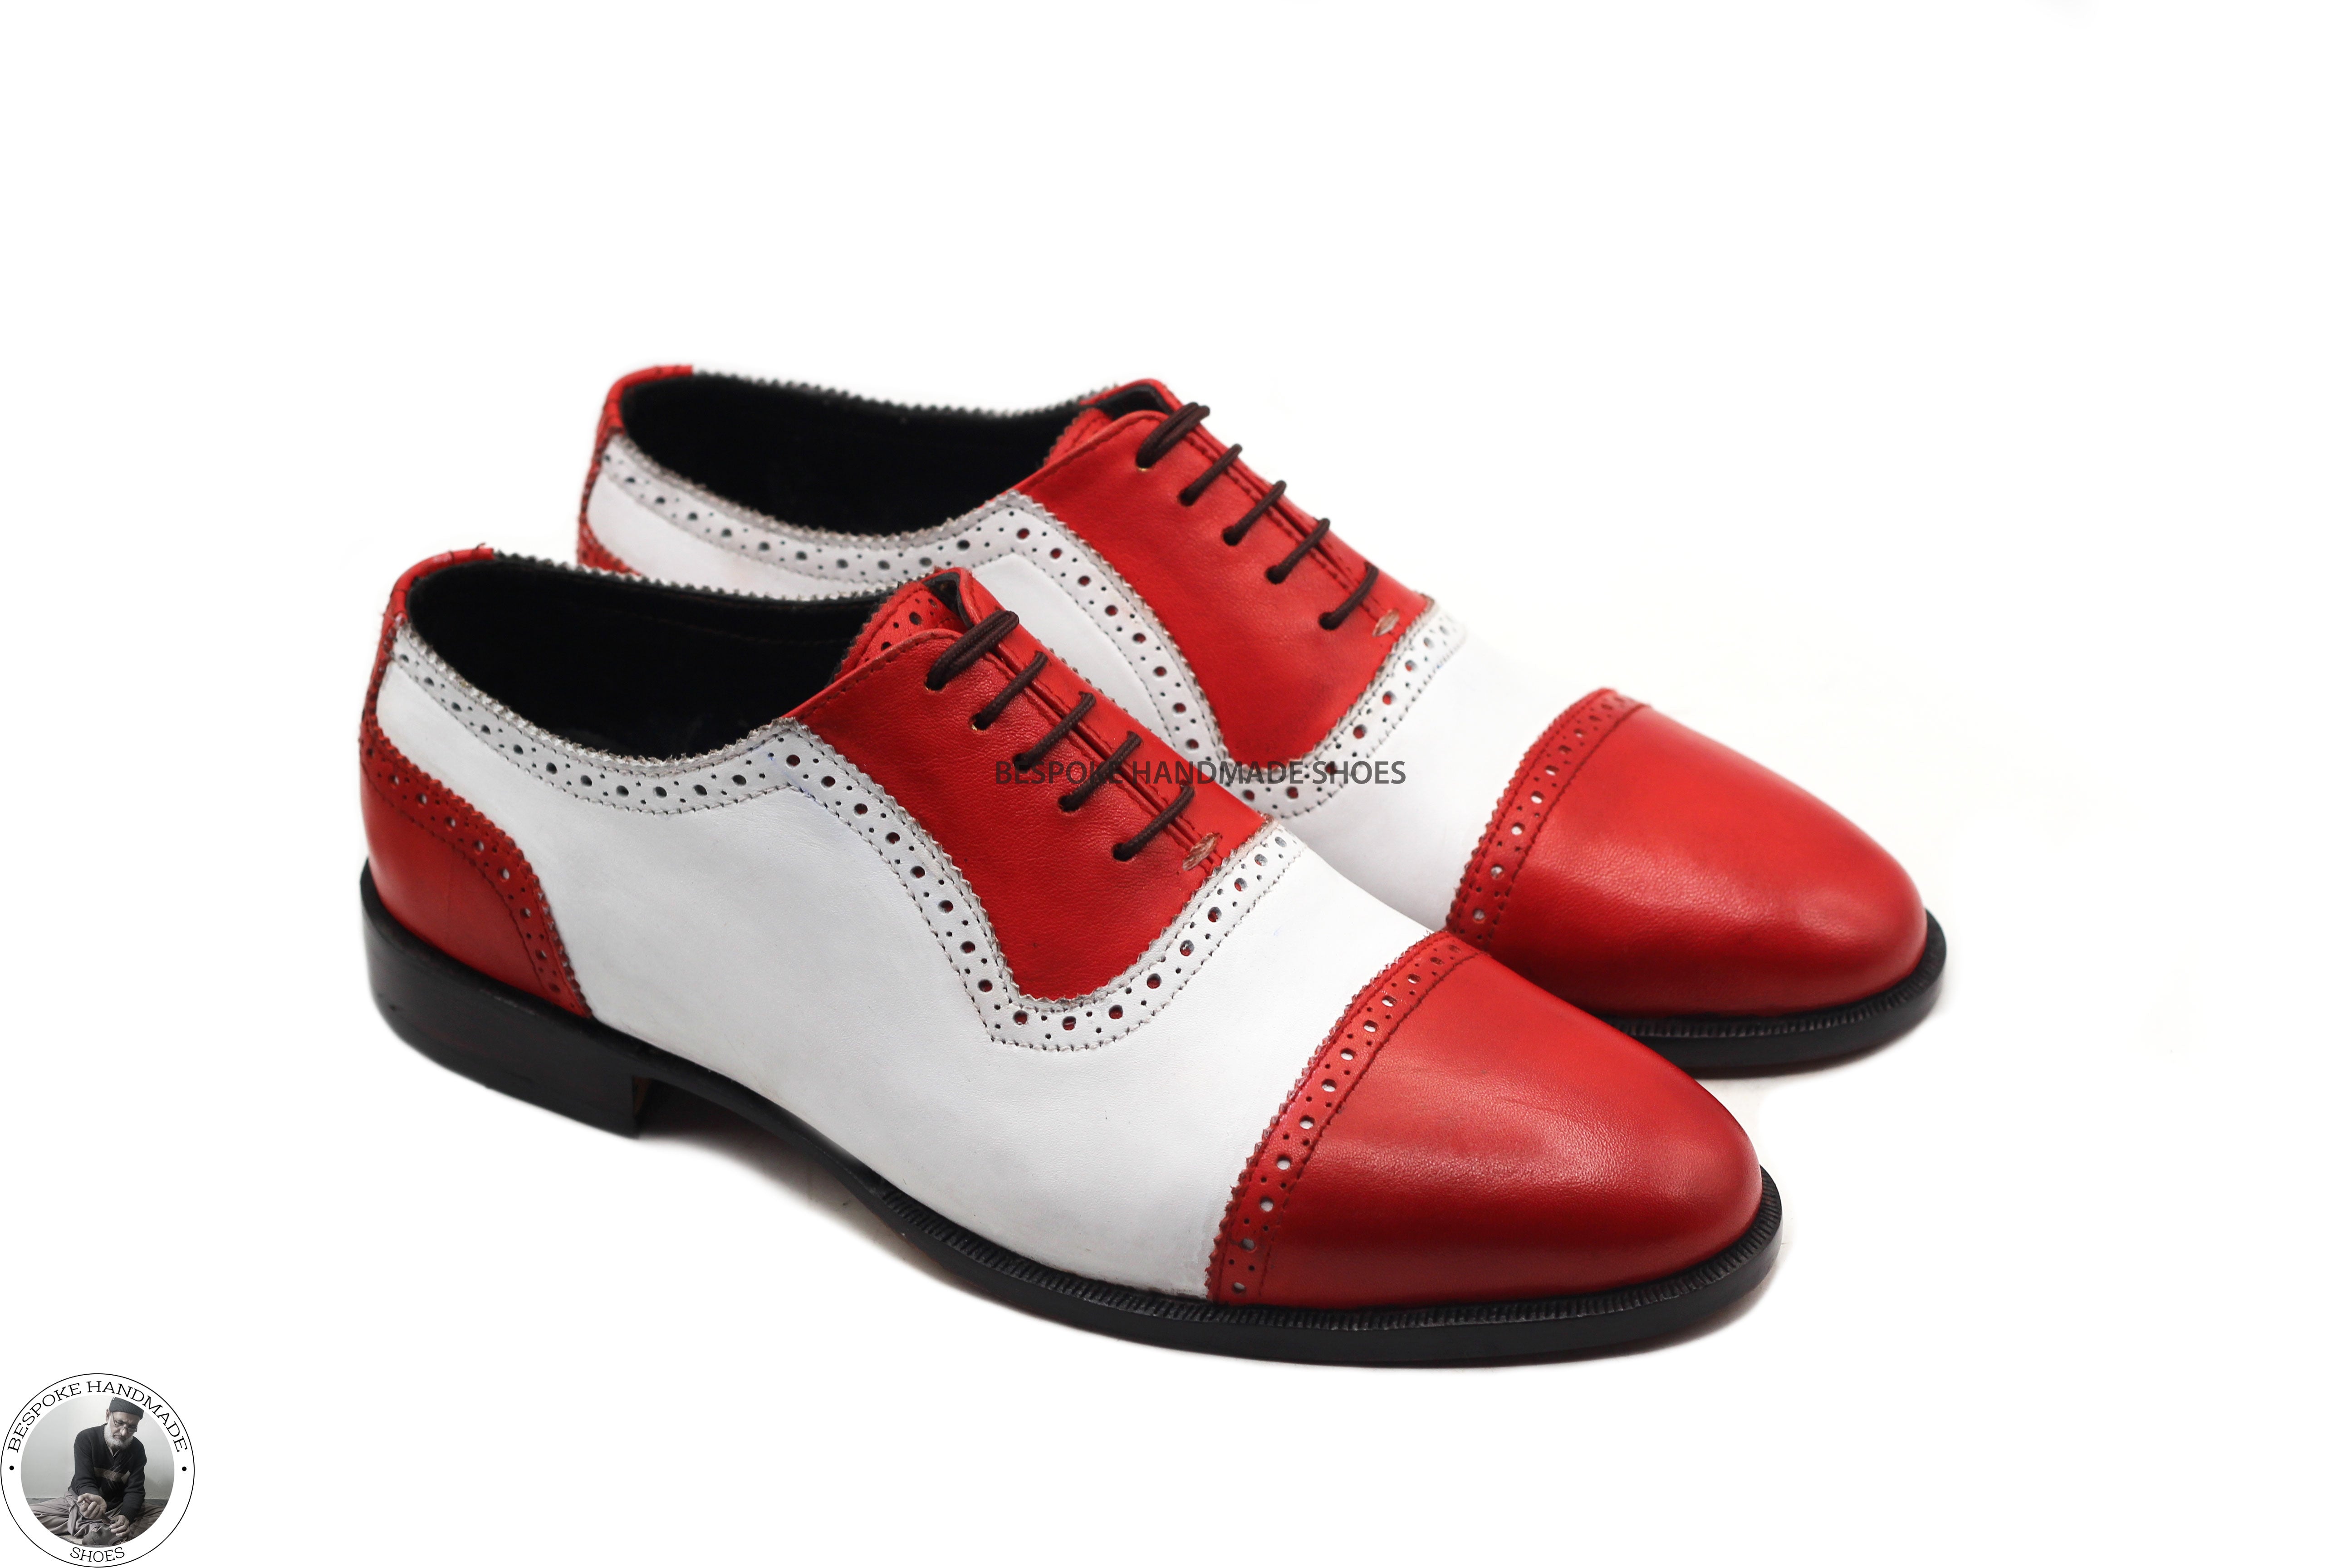 Copy of New Men's Handmade White & Red Color Leather Toe Cap Oxford Lace Up Designer Shoes For Men's